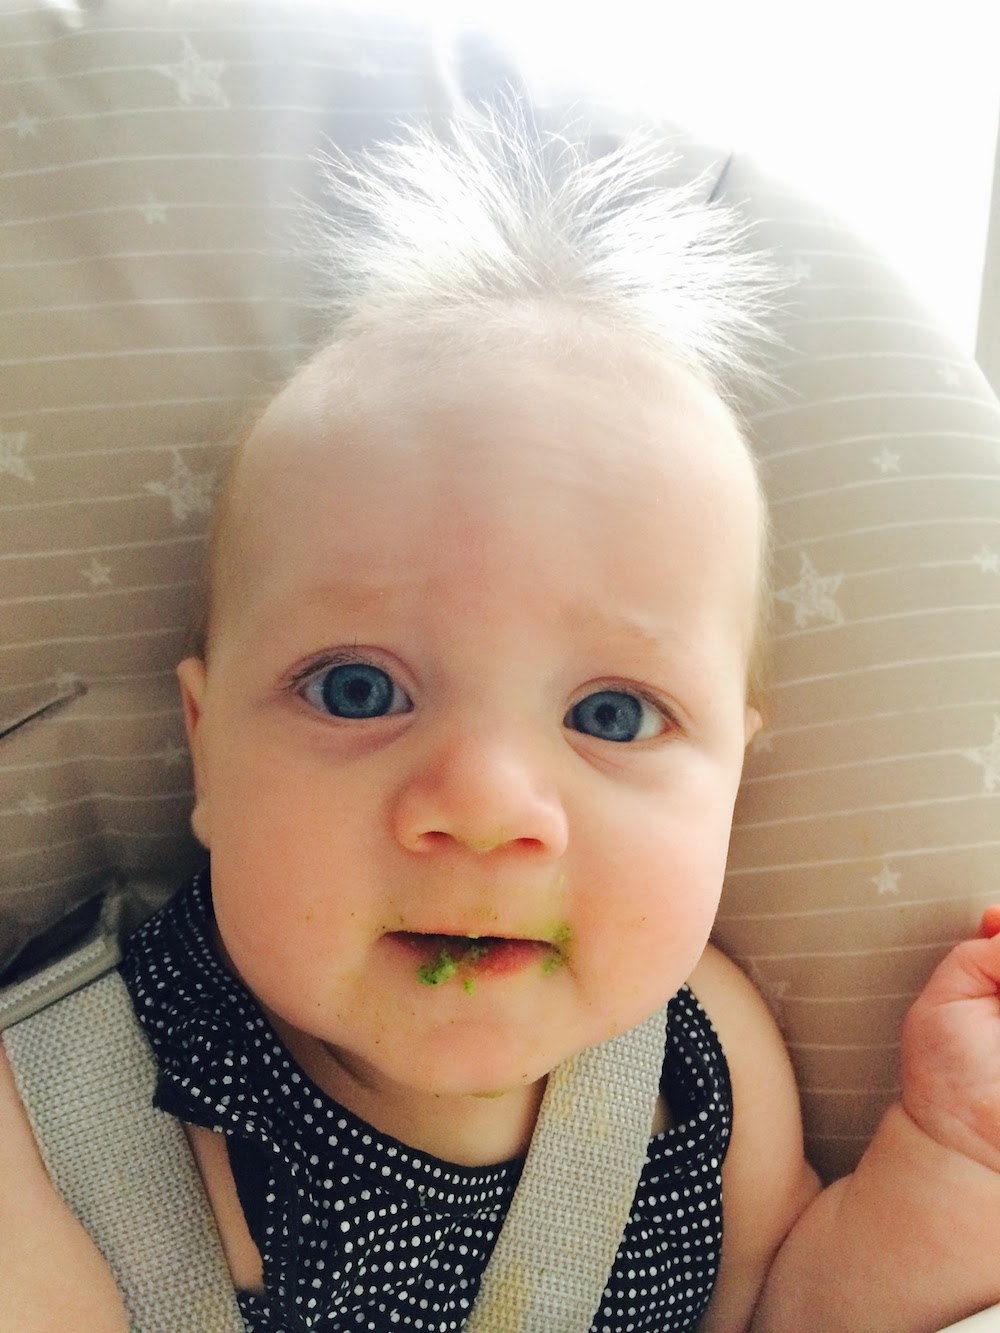 Uncombable Hair Syndrome Is A Real, Super-Rare Genetic Condition And This  Baby Has It